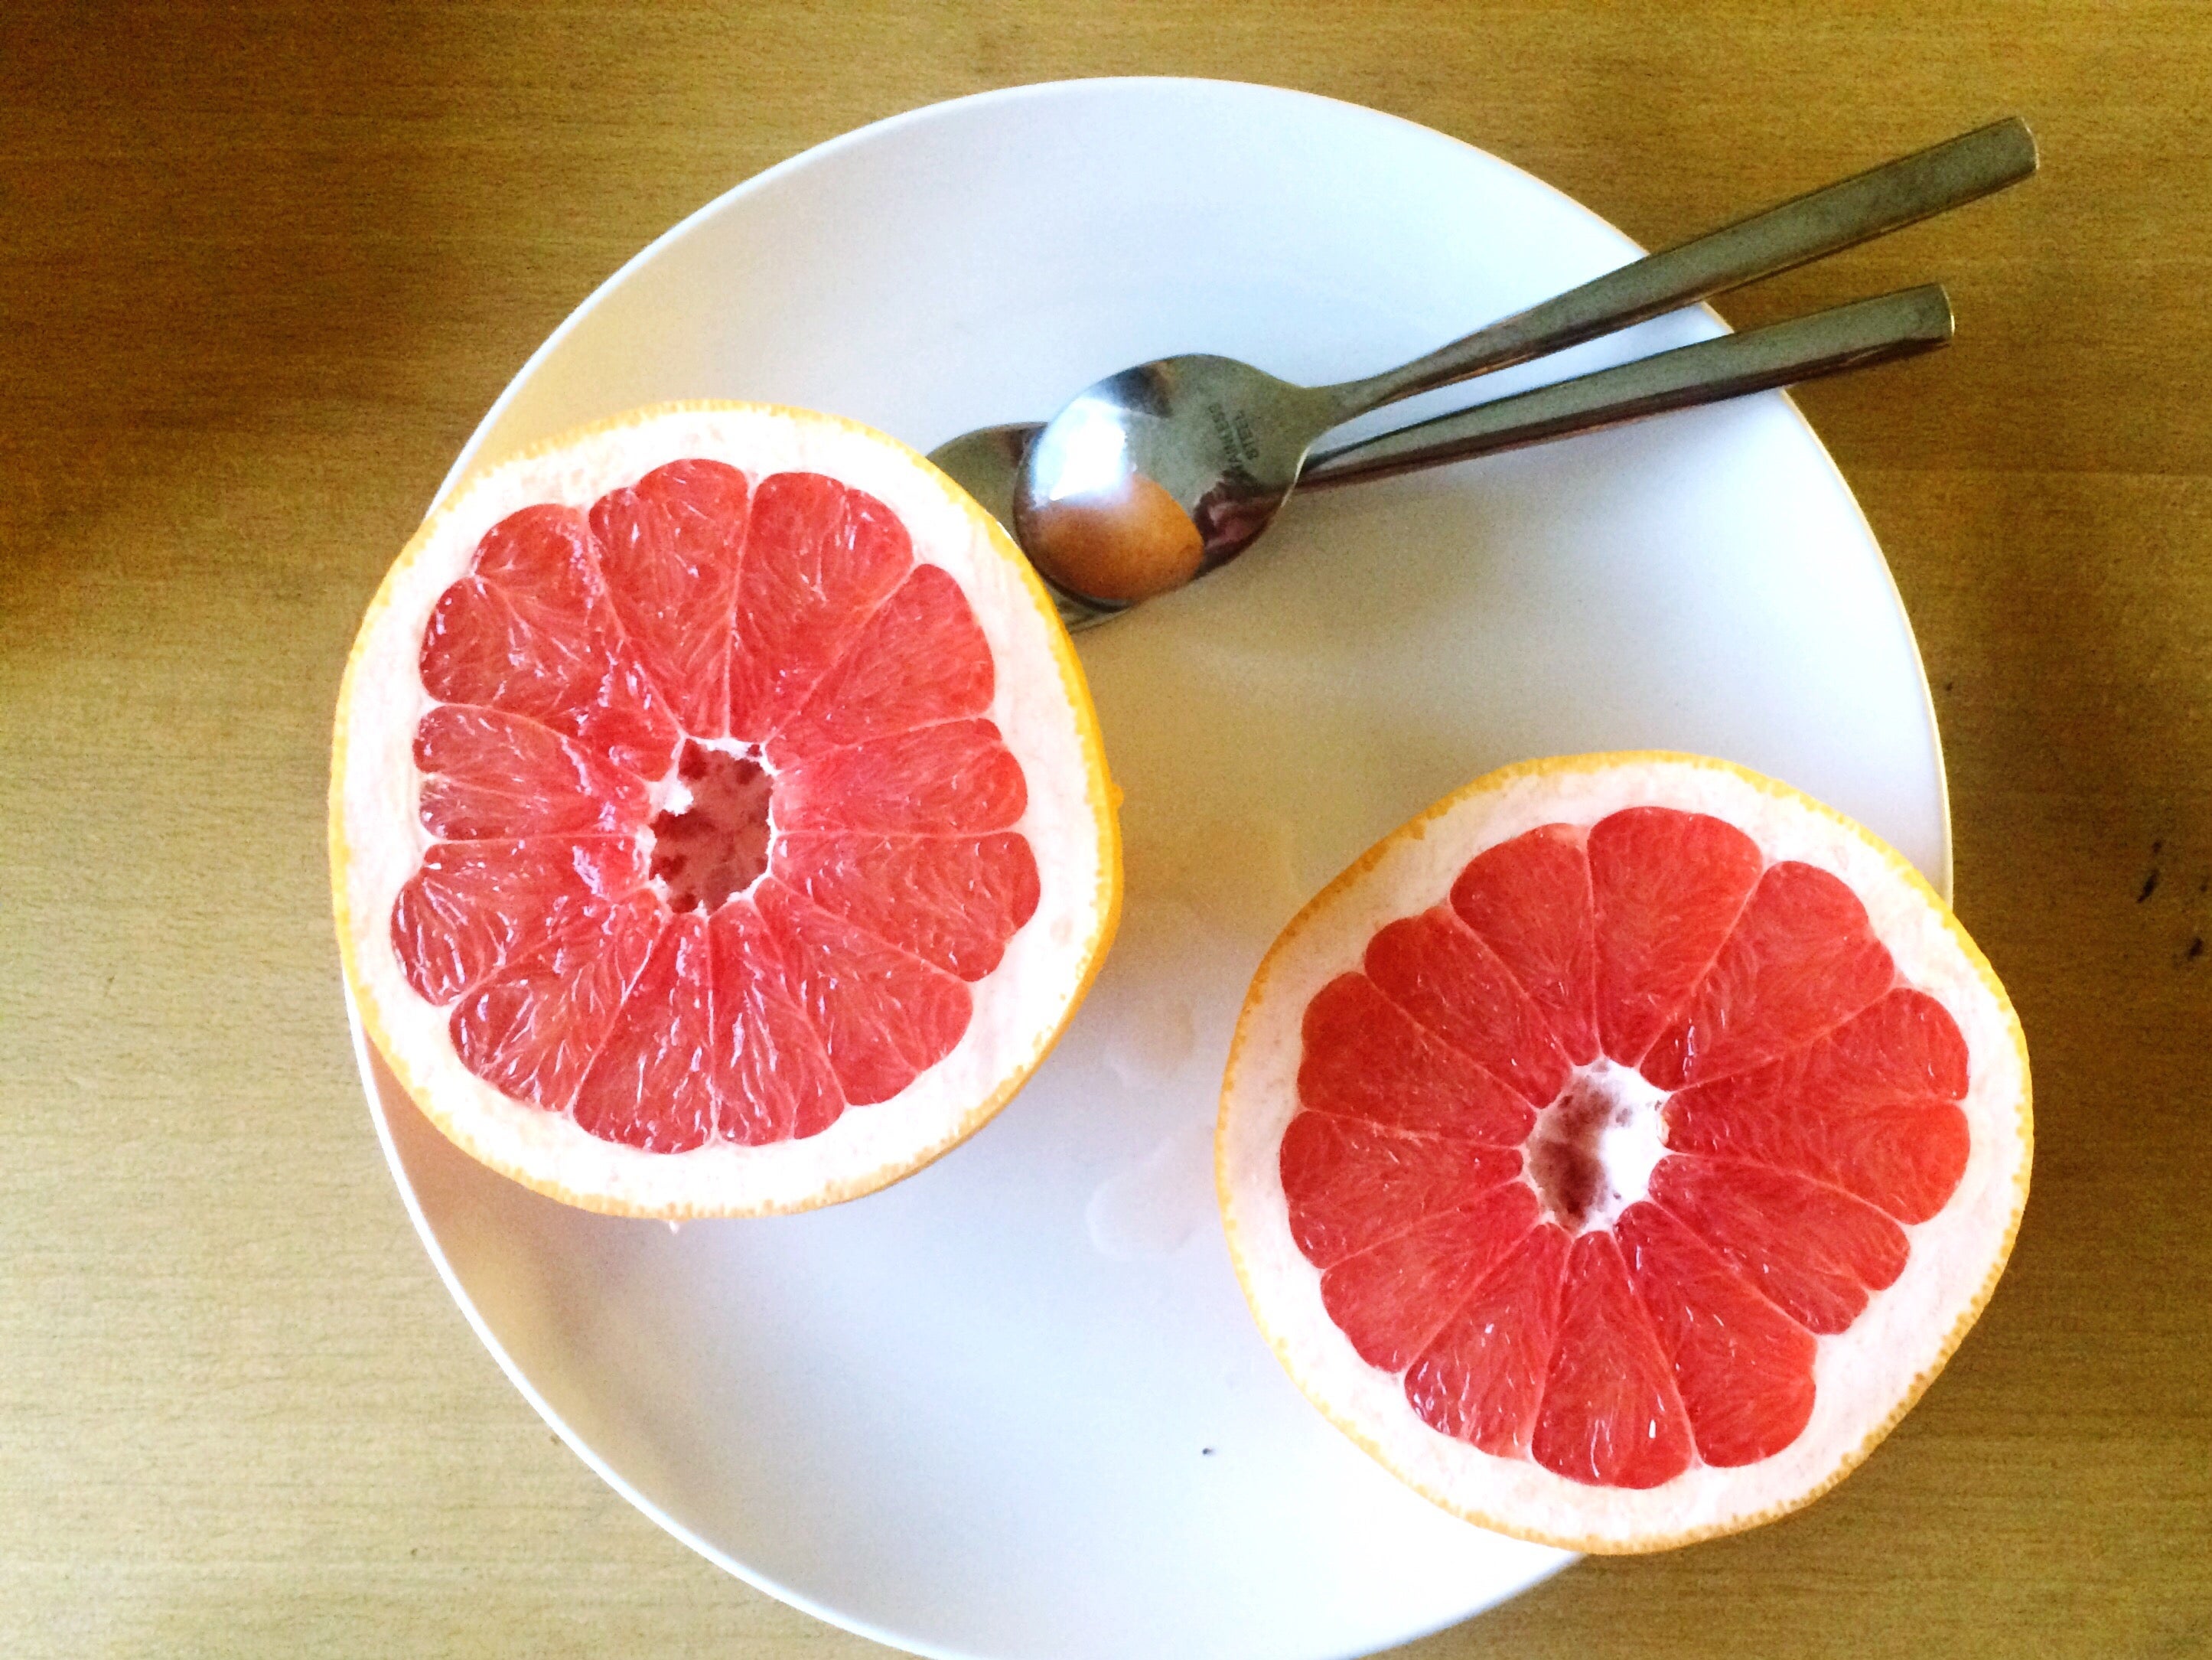 10 Grapefruit-Infused Beauty Finds to Pack Before Your Next Girl's Trip
